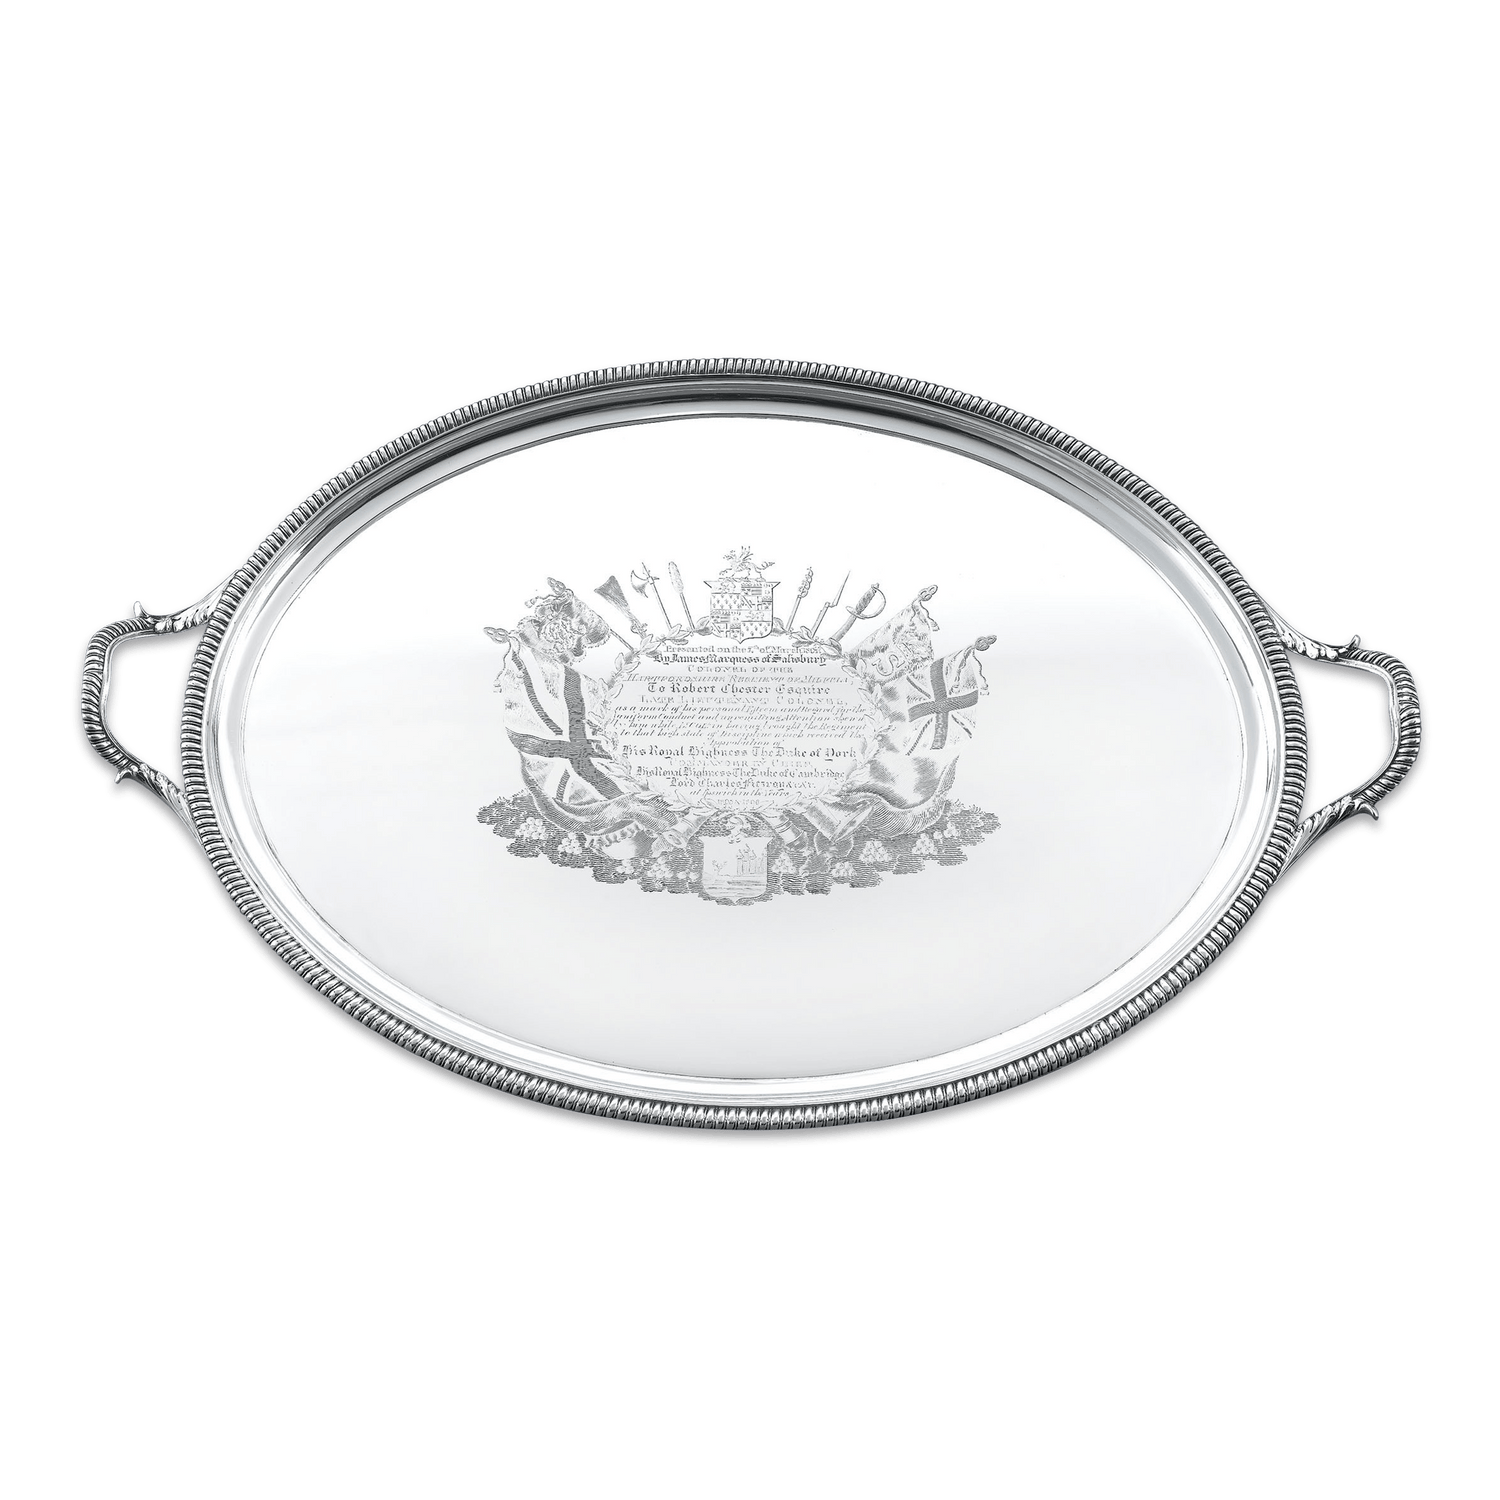 This George III silver tray is intricately chased and engraved and represents a prestigious gift